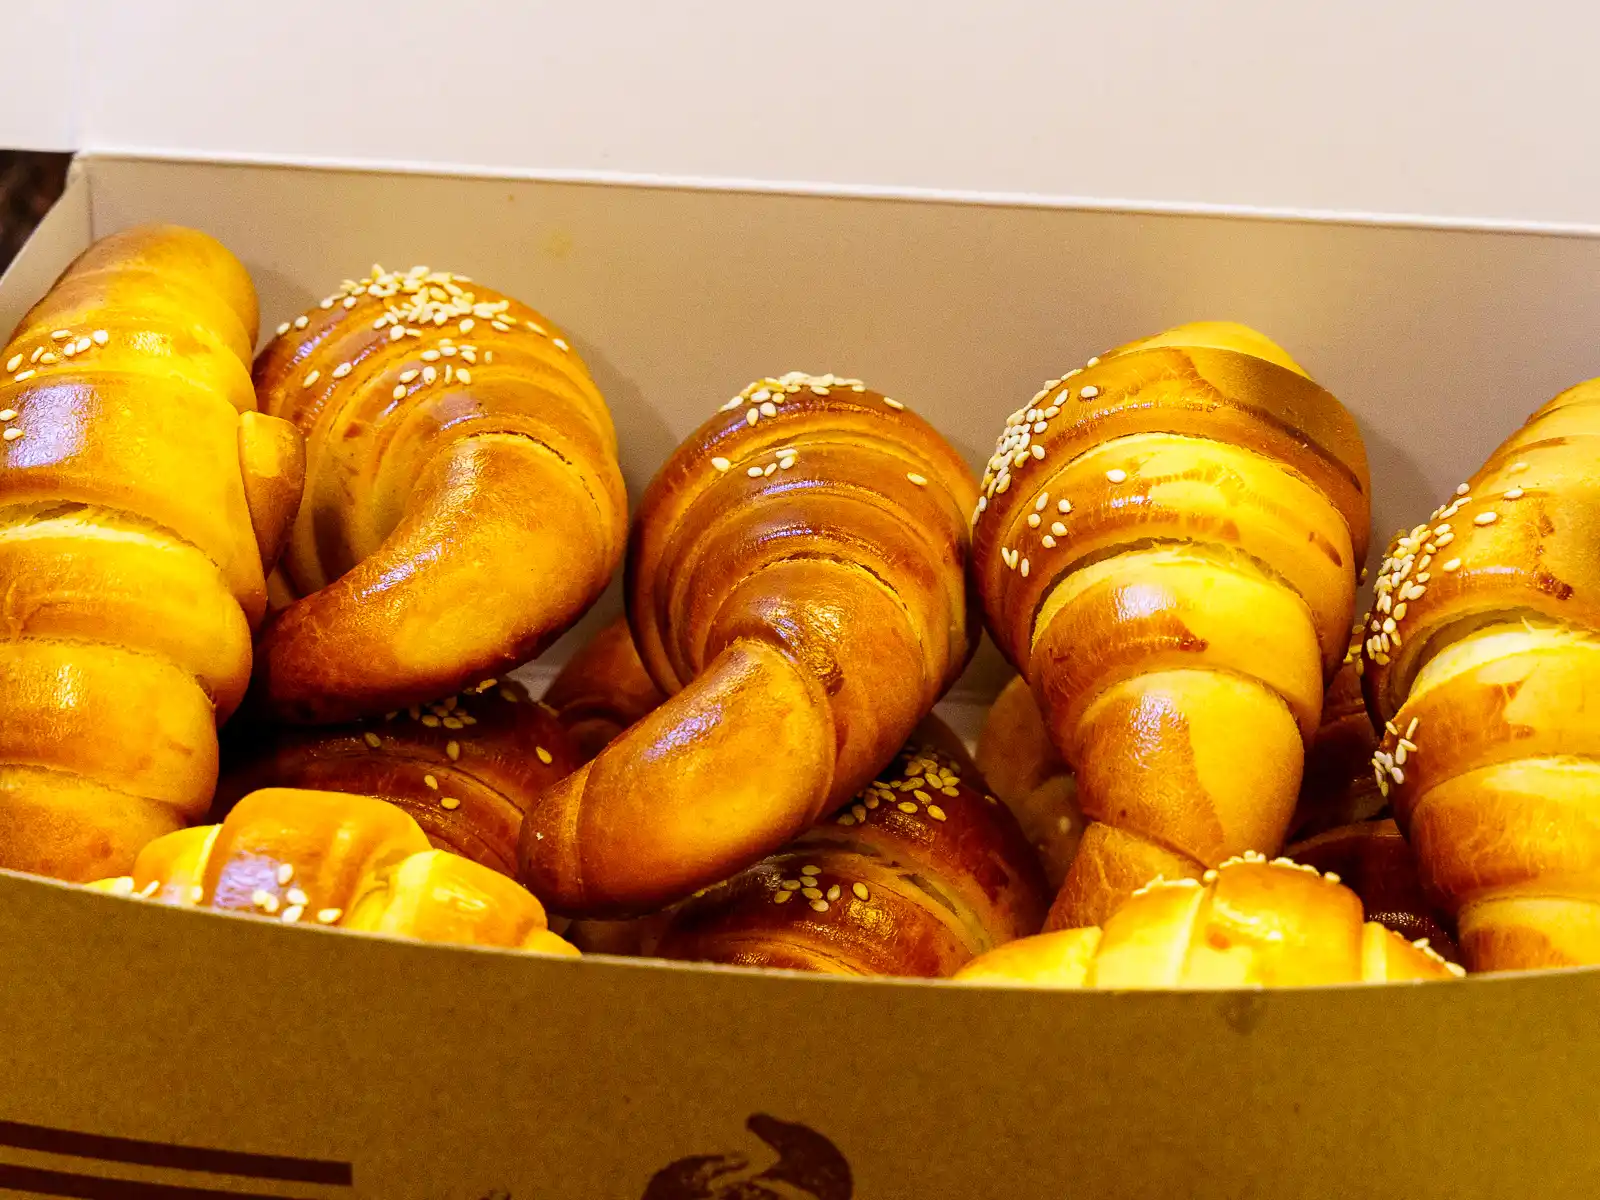 A container is filled with about a dozen croissants.